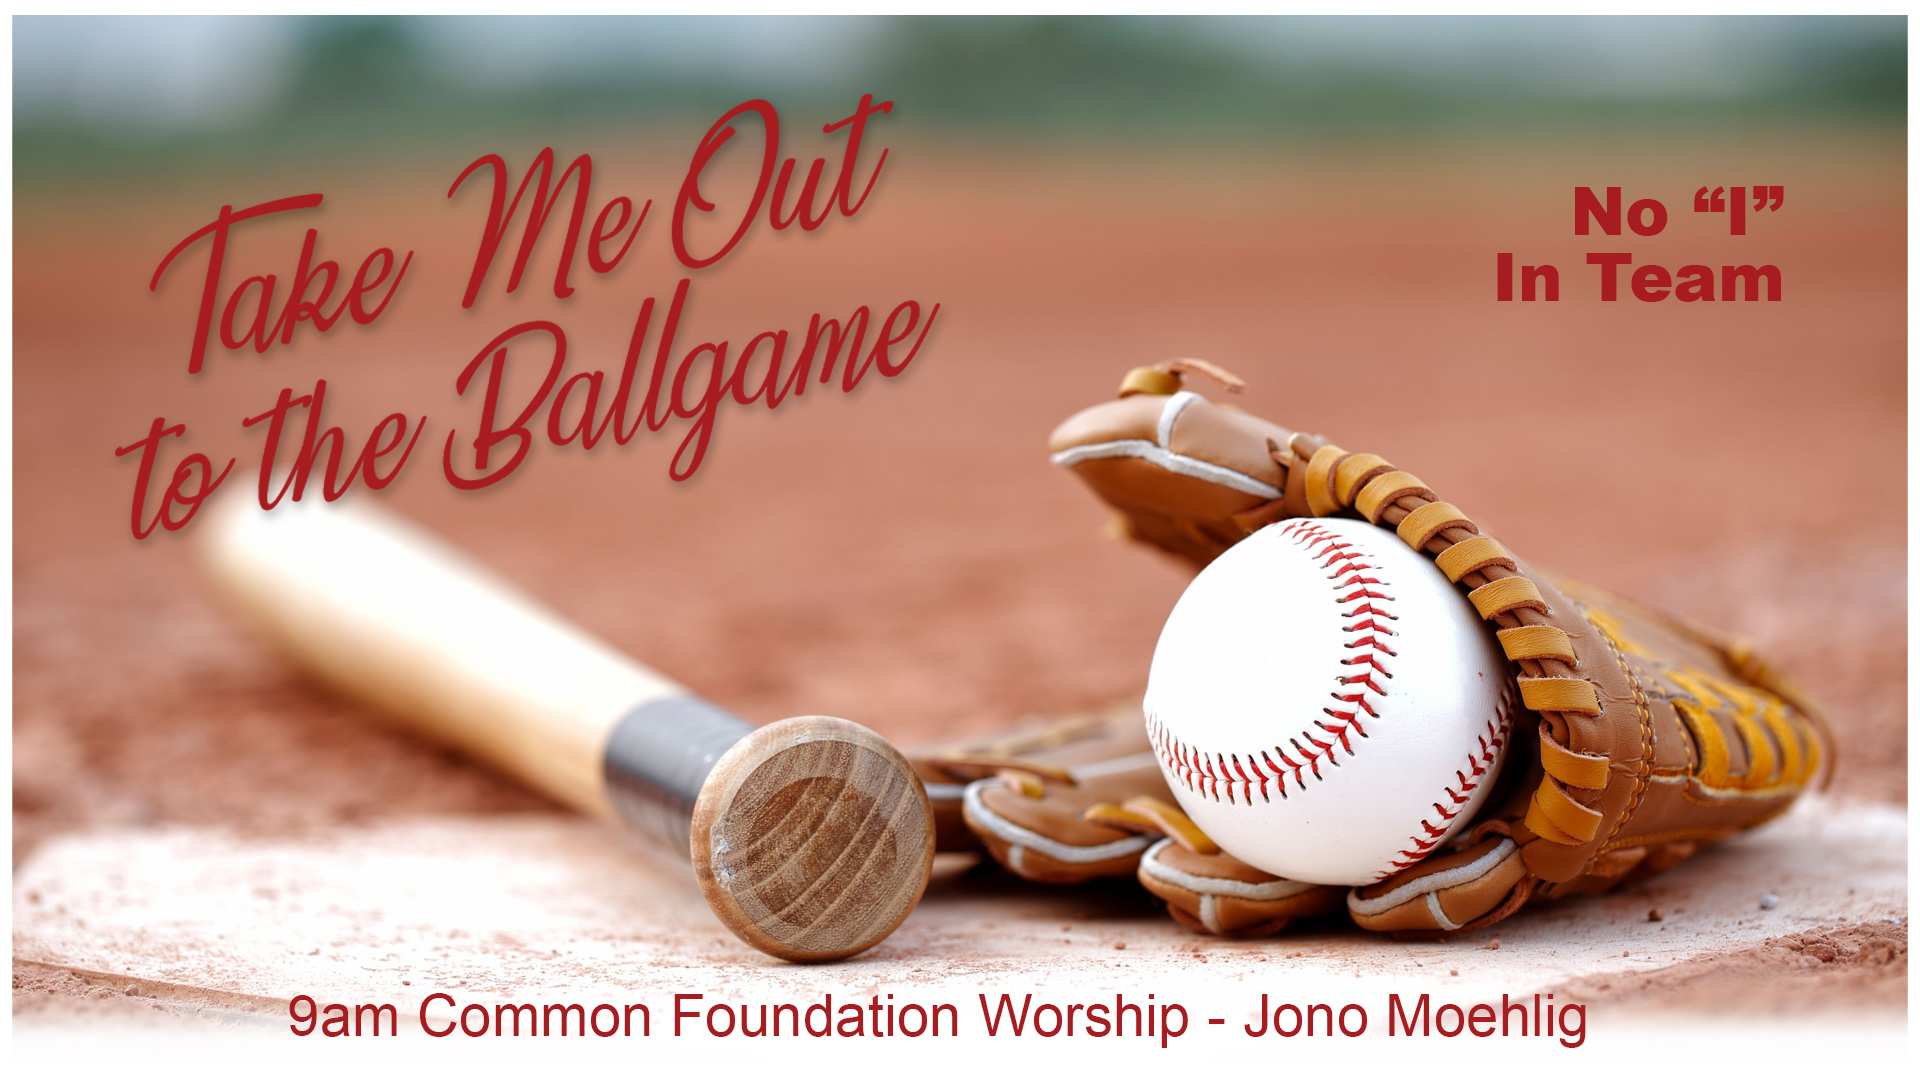 Take Me Out to the Ballgame: No "i" in Team (Common Foundation)